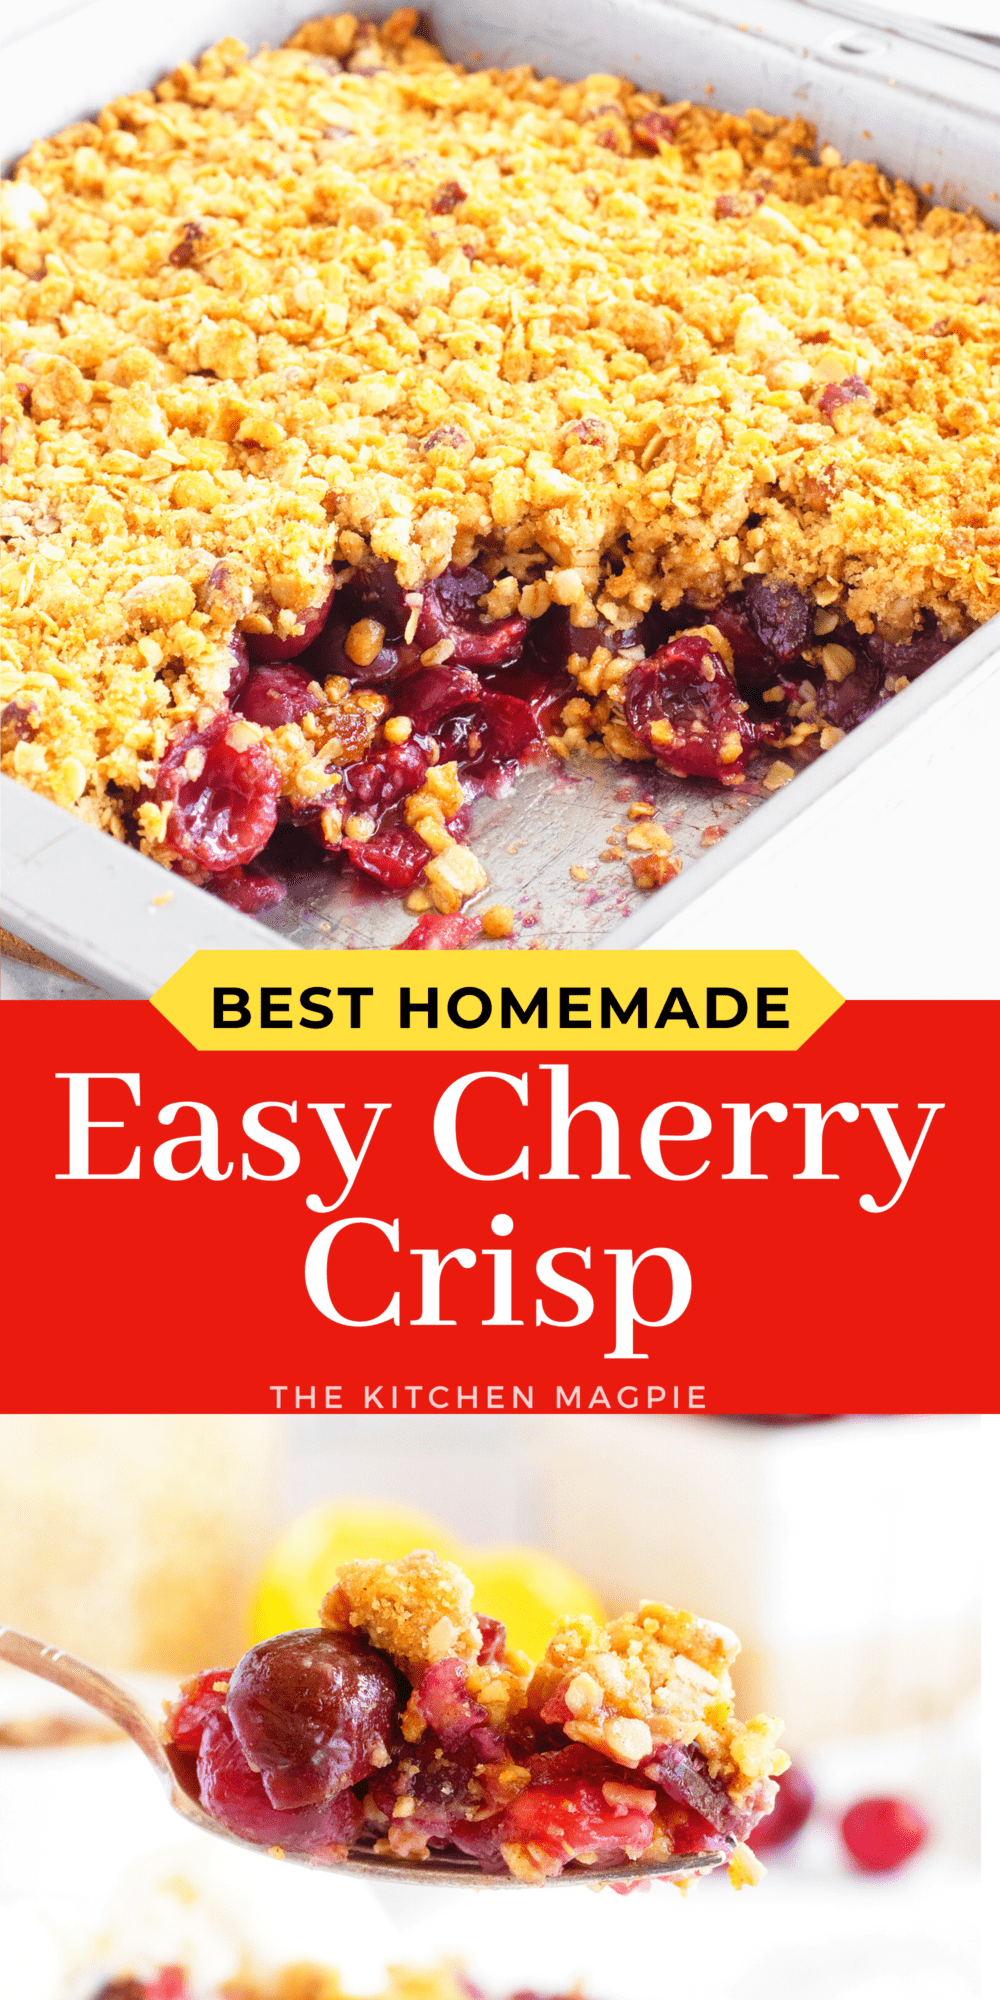 This easy and delicious cherry crisp can be made with fresh summer cherries or even defrosted frozen cherries.